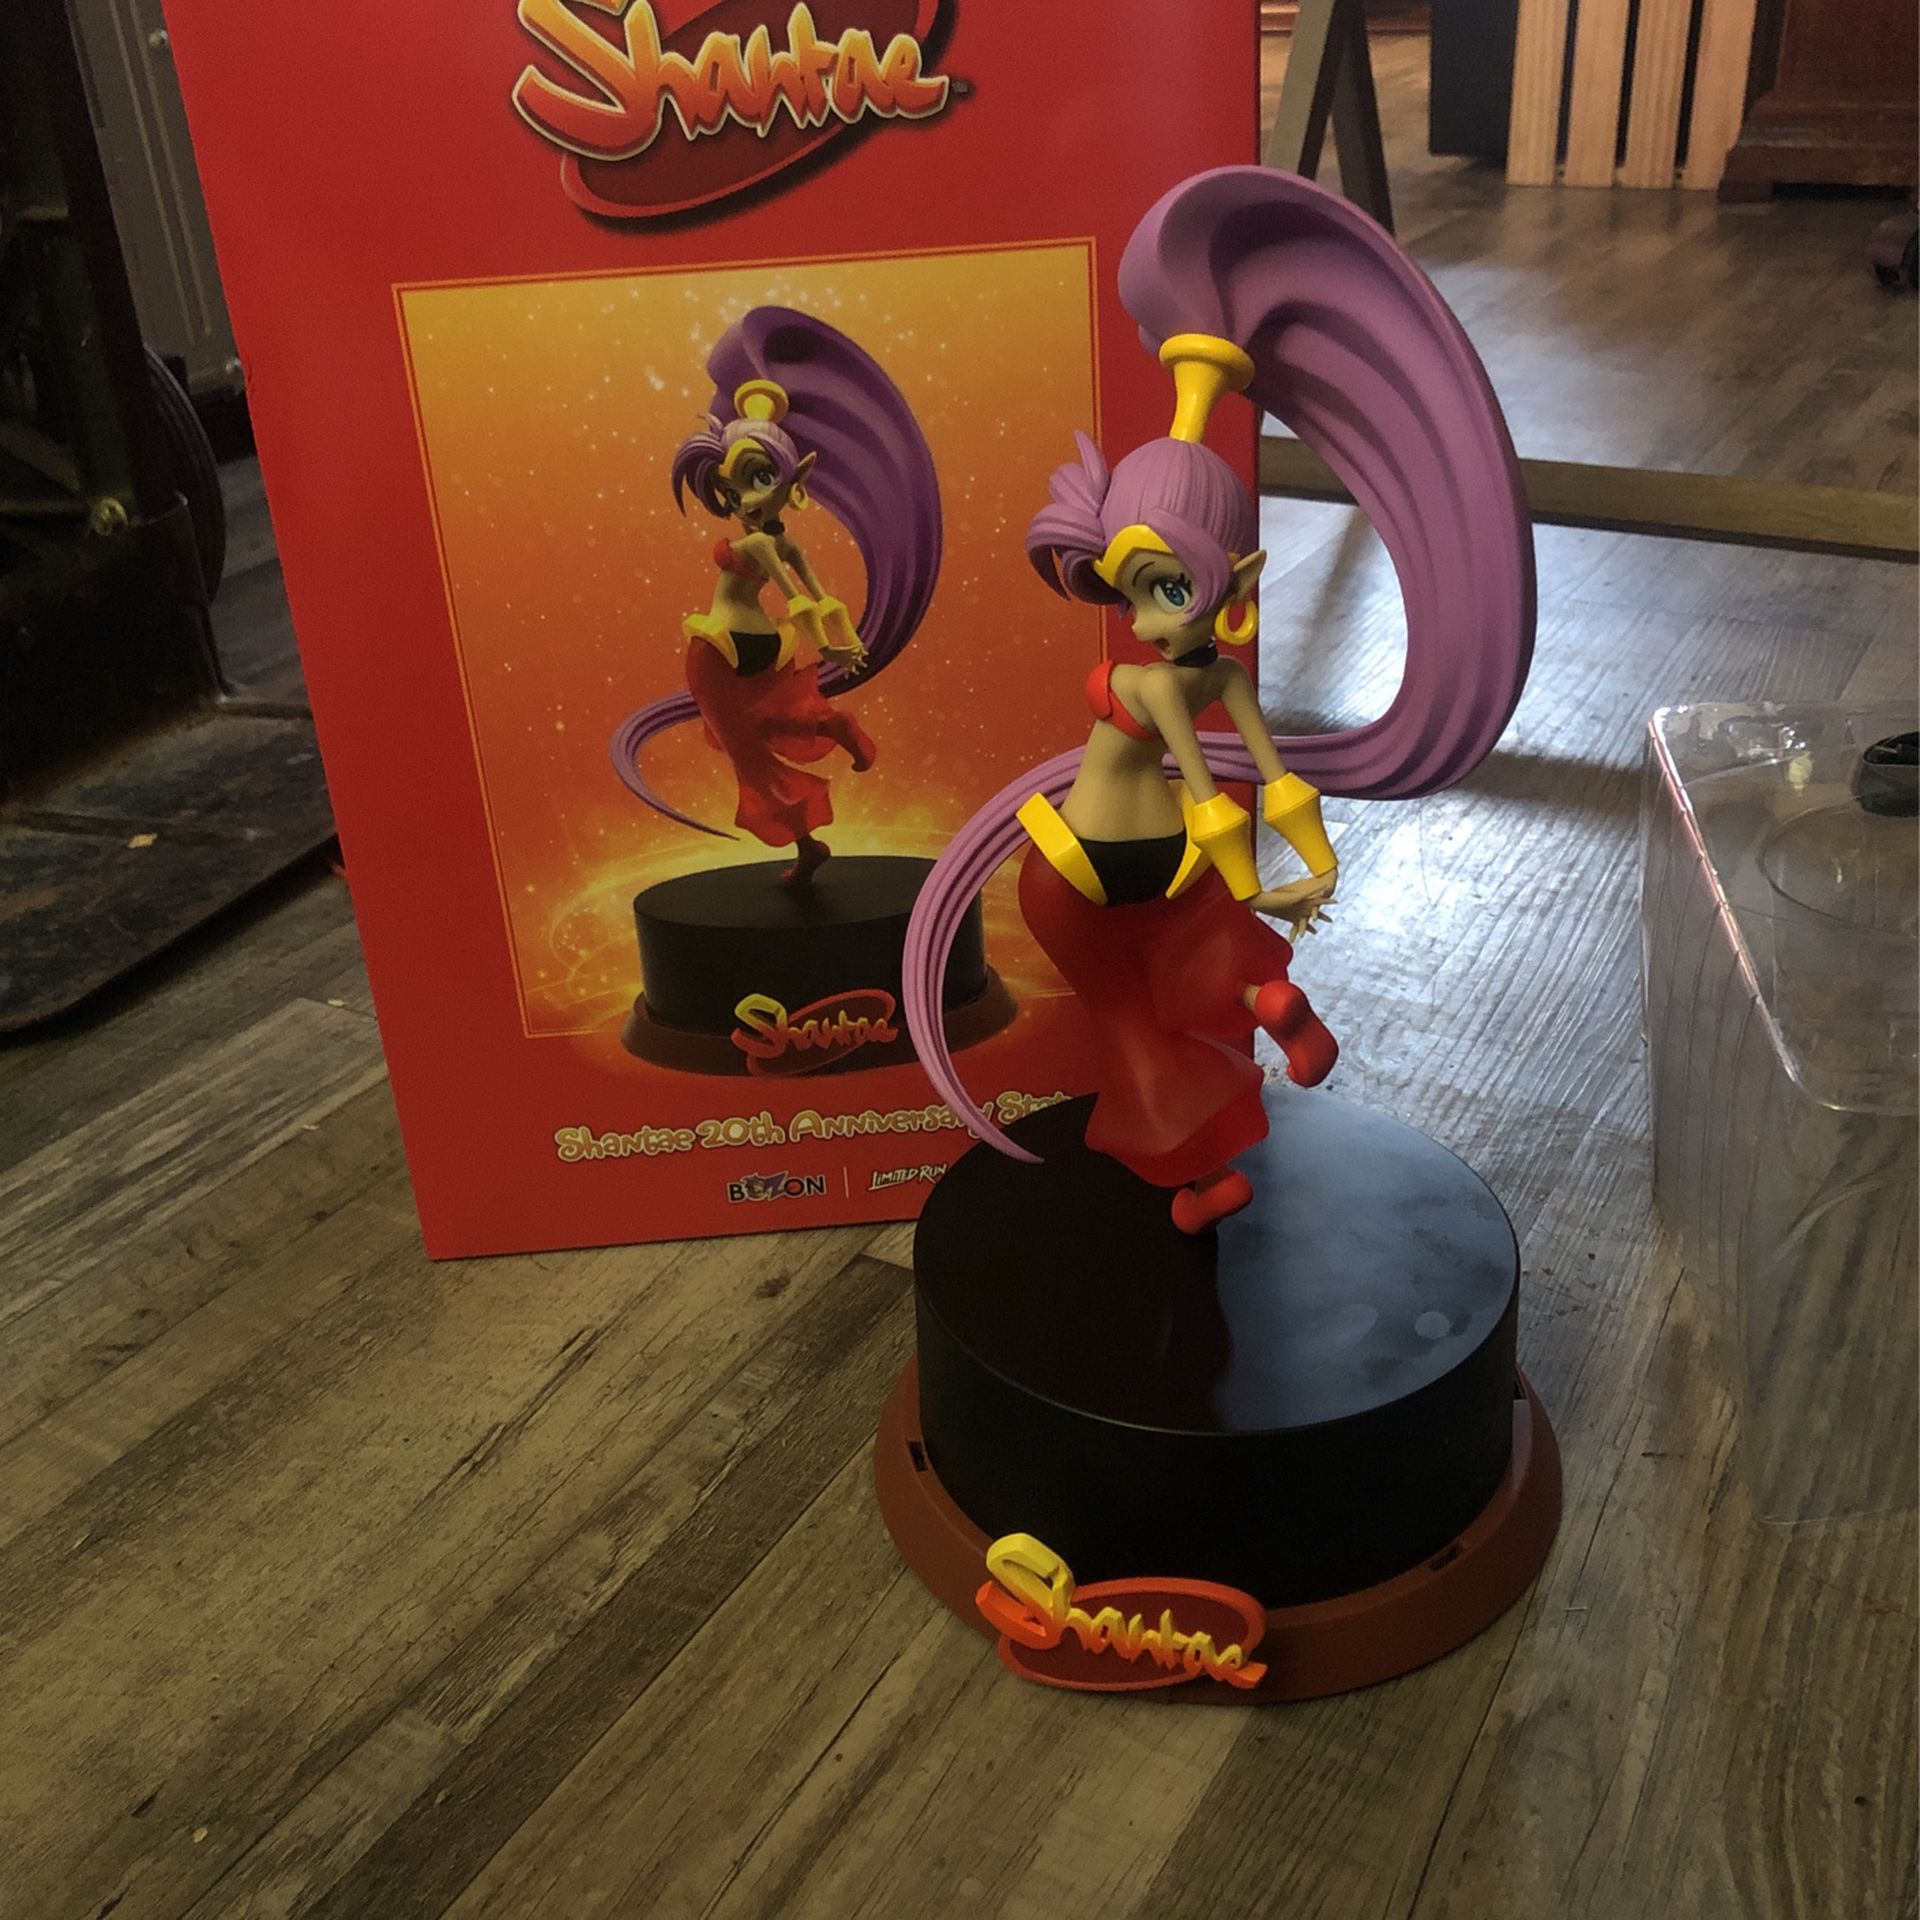 Shantae 20th Anniversary Statue Figure w/ Acrylic Standees by Limited Run Games